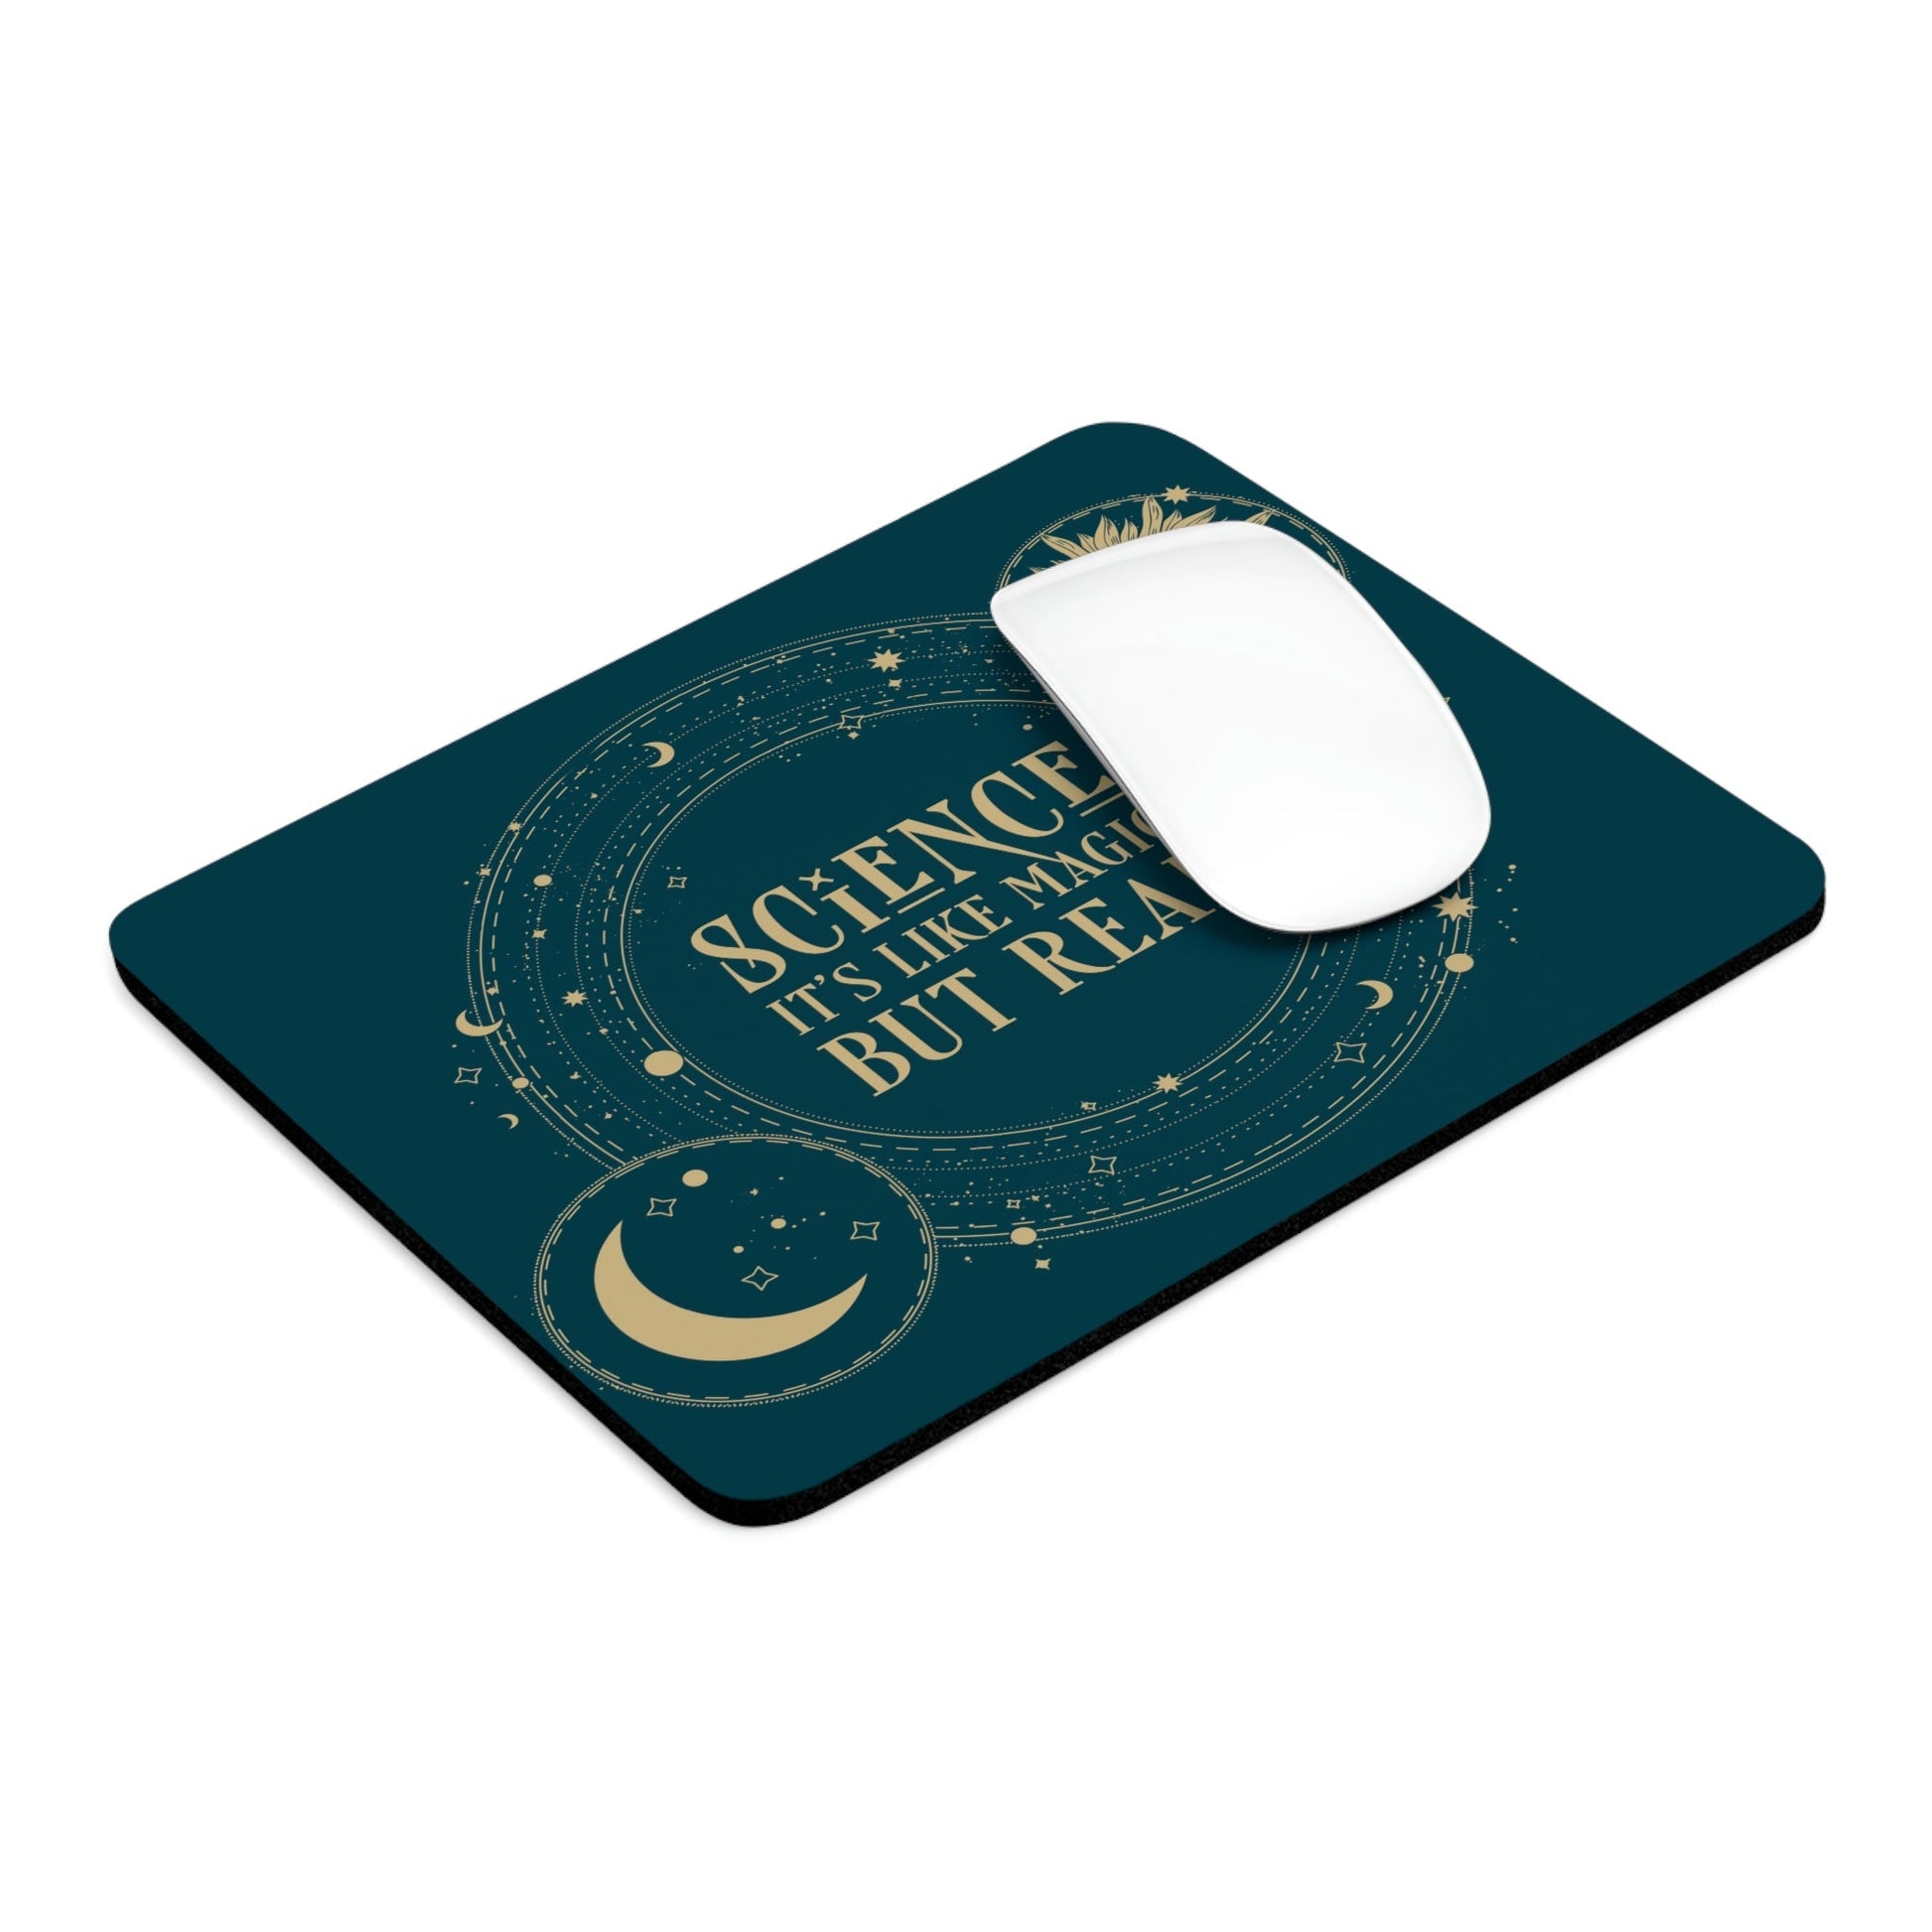 Science It's Like Magic But Real Quotes Humor Art Ergonomic Non-slip Creative Design Mouse Pad Ichaku [Perfect Gifts Selection]